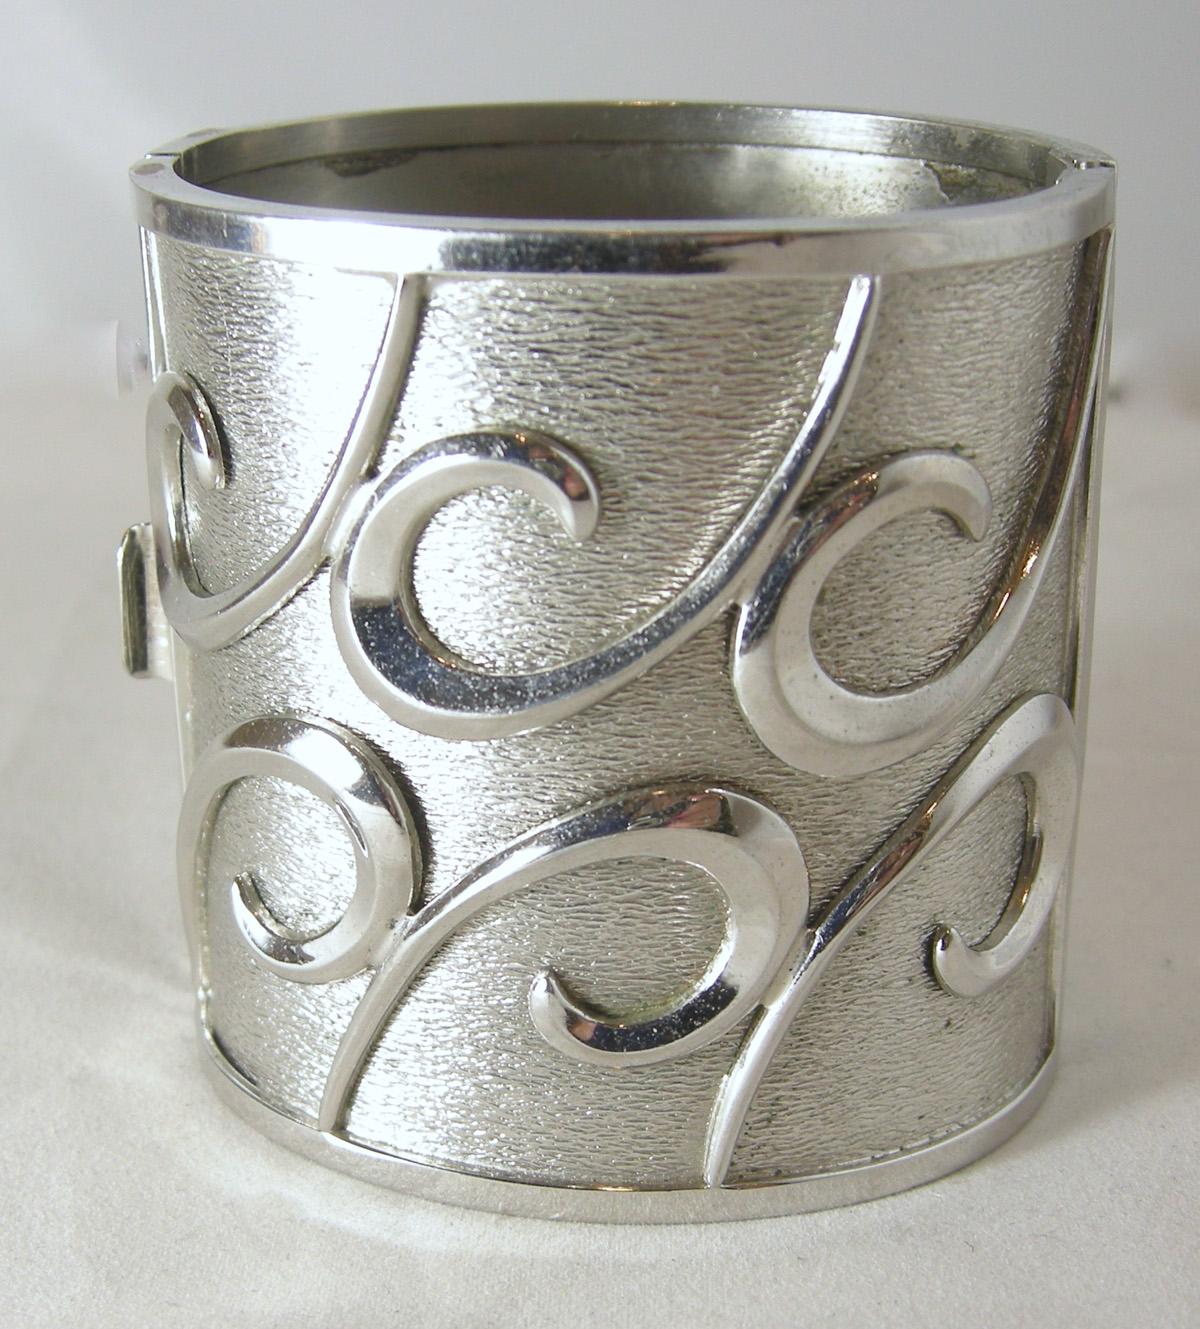 This vintage Bartek chrome cuff bracelet is almost 3” wide and the top plate is 3-3/4” wide and 2-7/8” tall.  The top and bottom plates have swirling waves of chrome.  It has a slide in clasp and signed “Bartek” and in excellent condition.